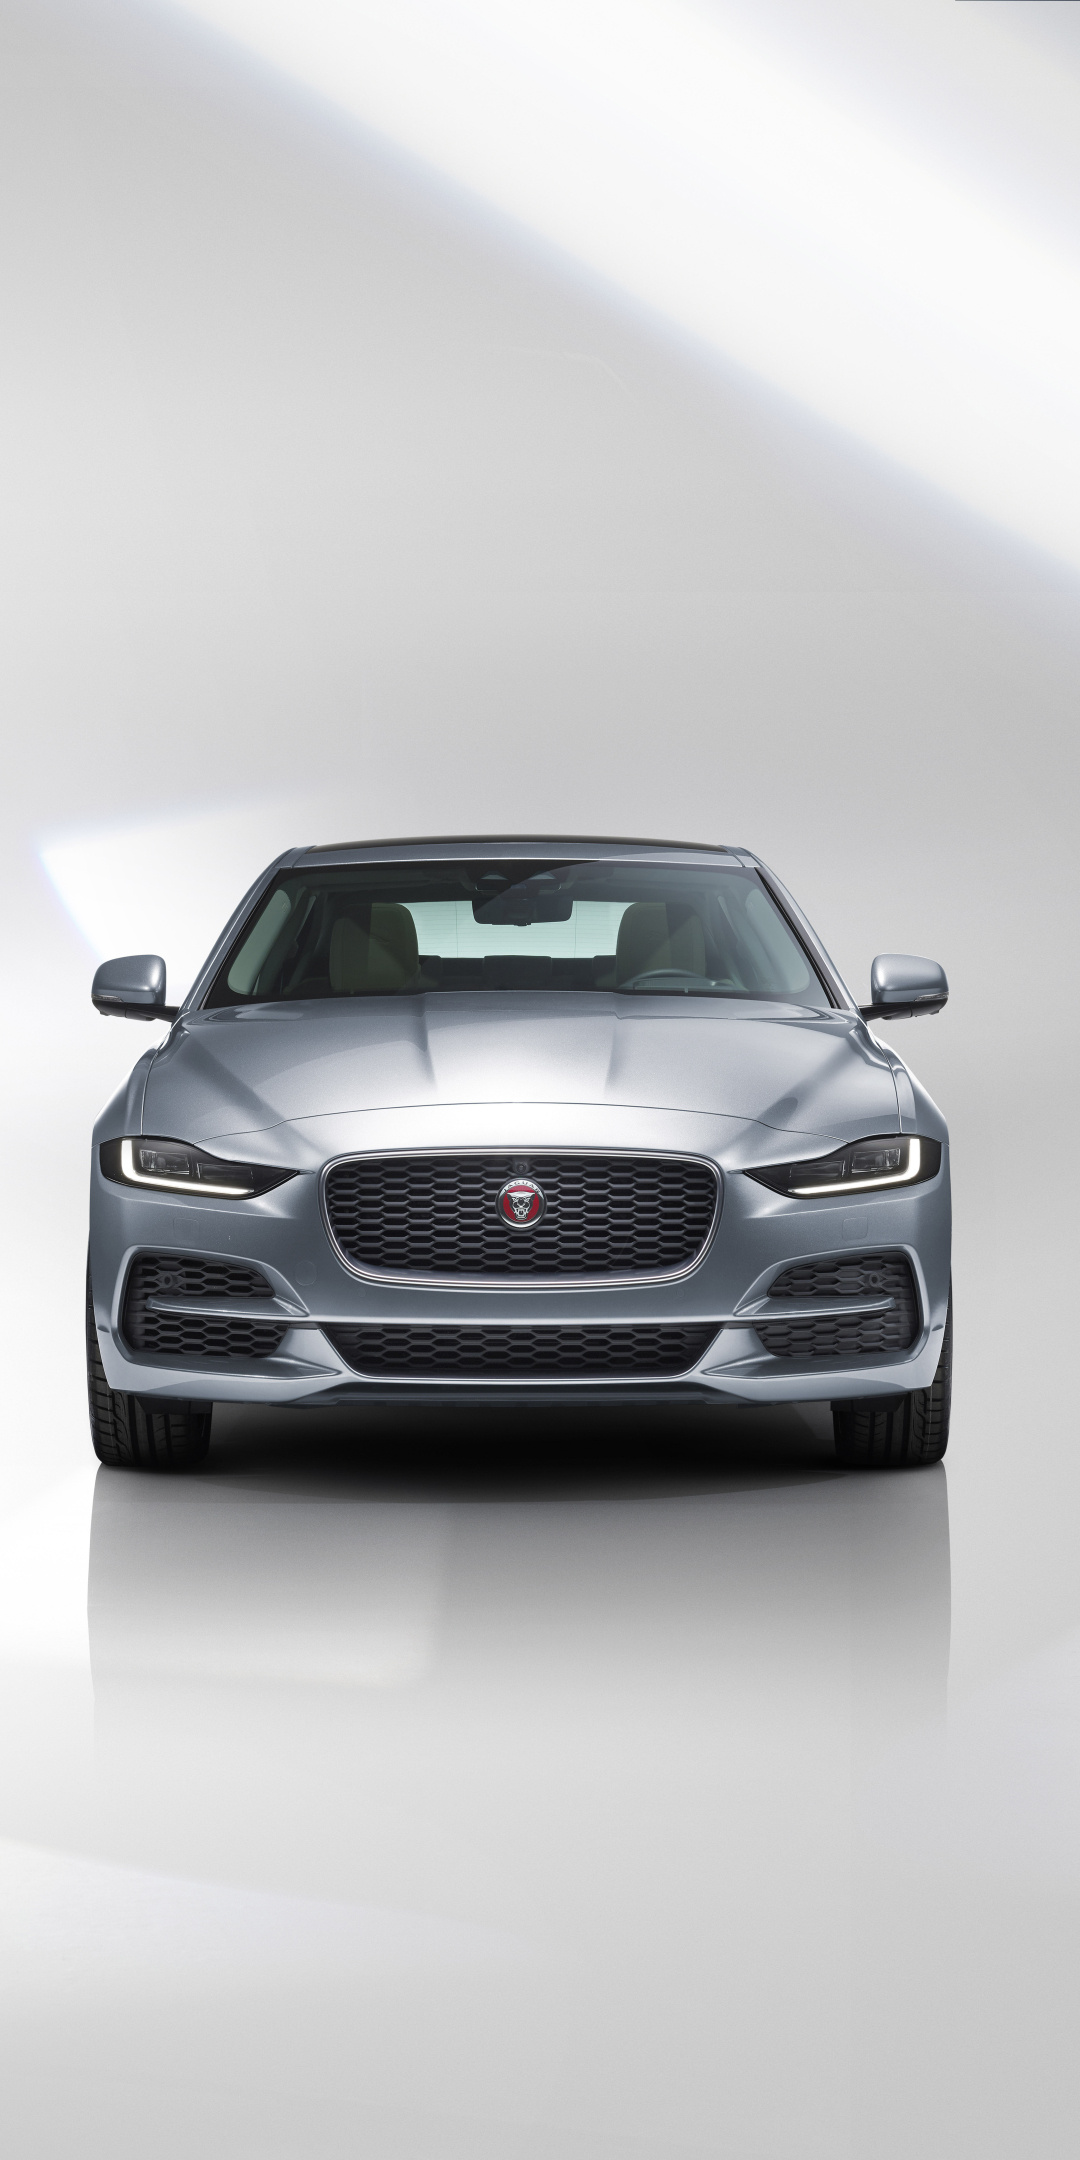 Jaguar XF, Car mobile wallpapers, Stylish on-the-go, Iconic design, 1080x2160 HD Handy